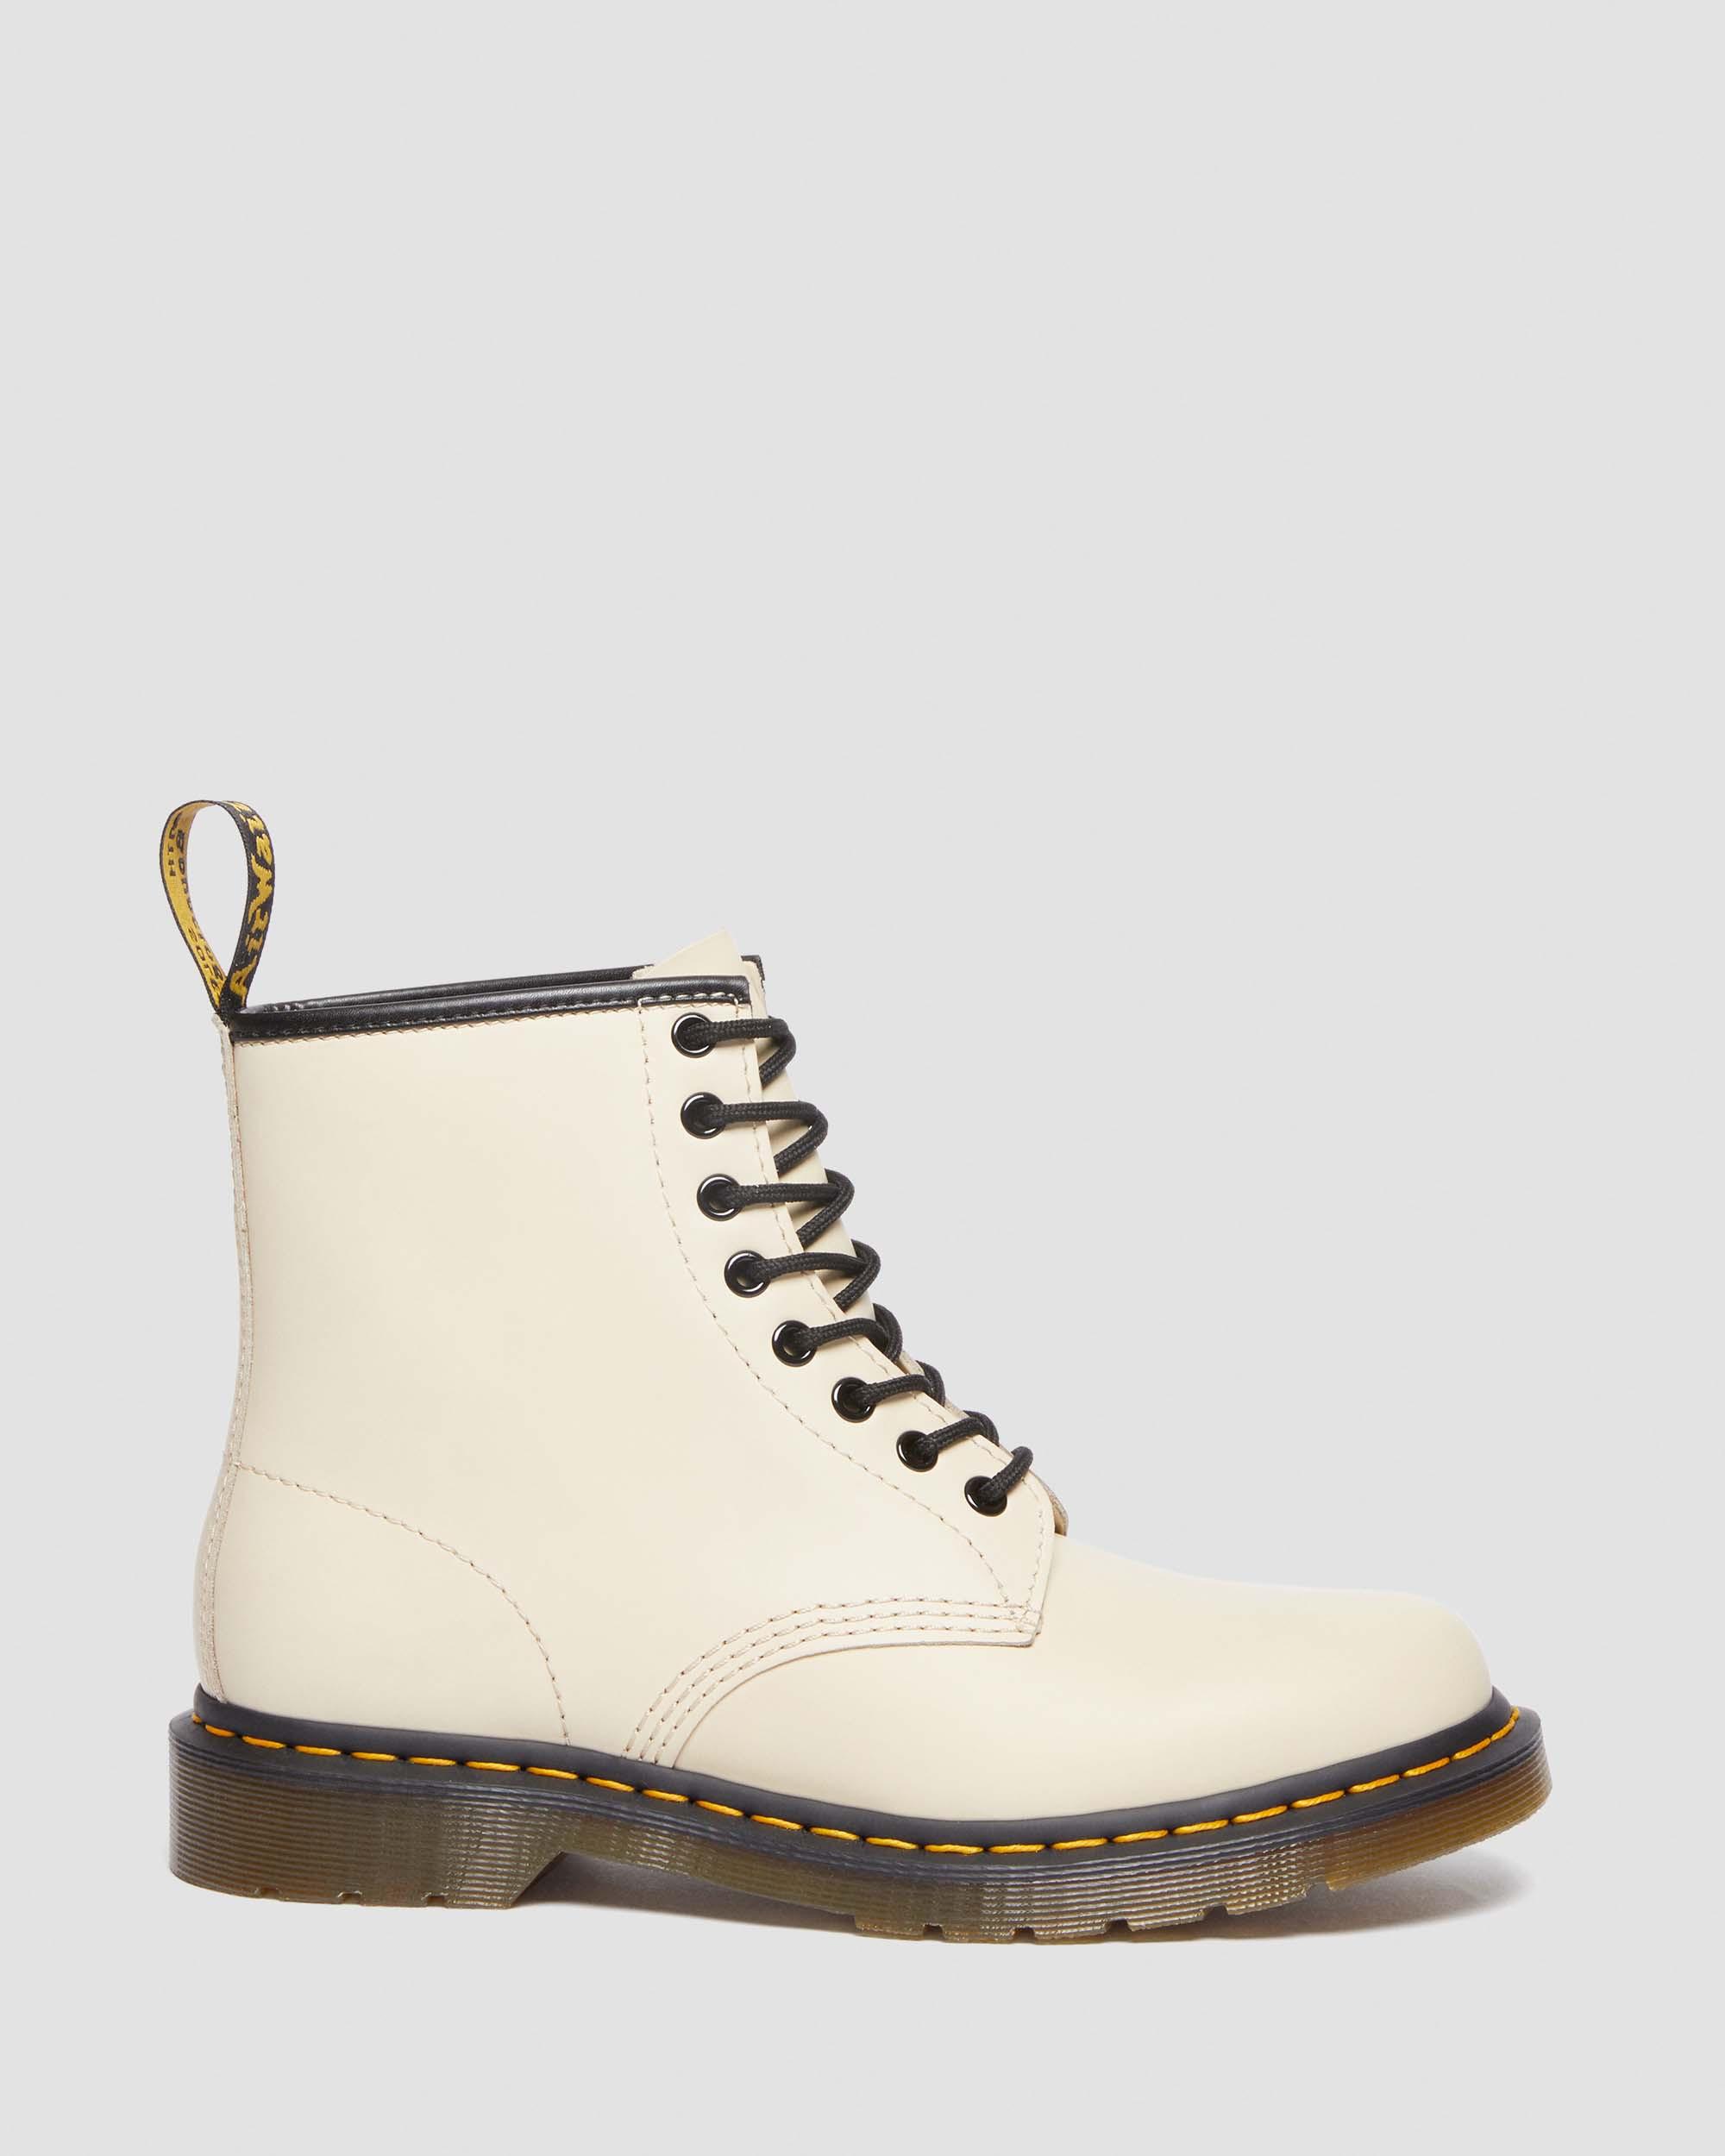 Smooth Dr. Martens Parchment Beige Leather | Lace Up in Boots 1460